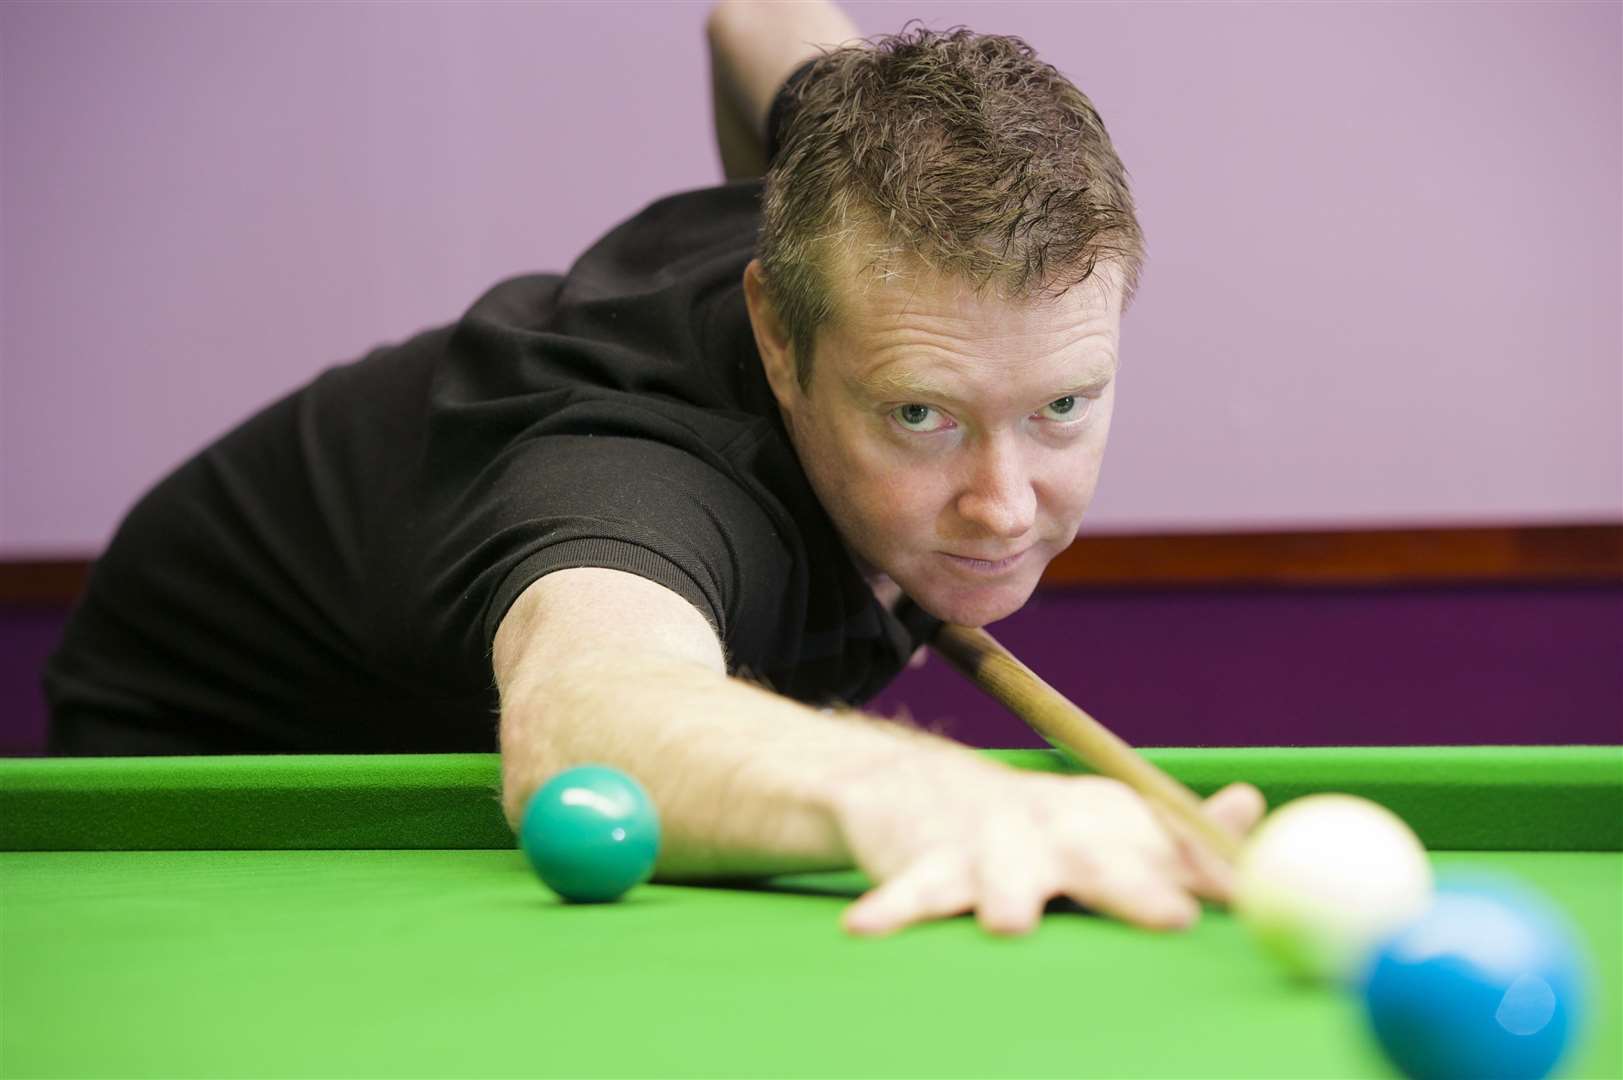 Rainham potter Gerard Greene suffered a first round exit in the English Open